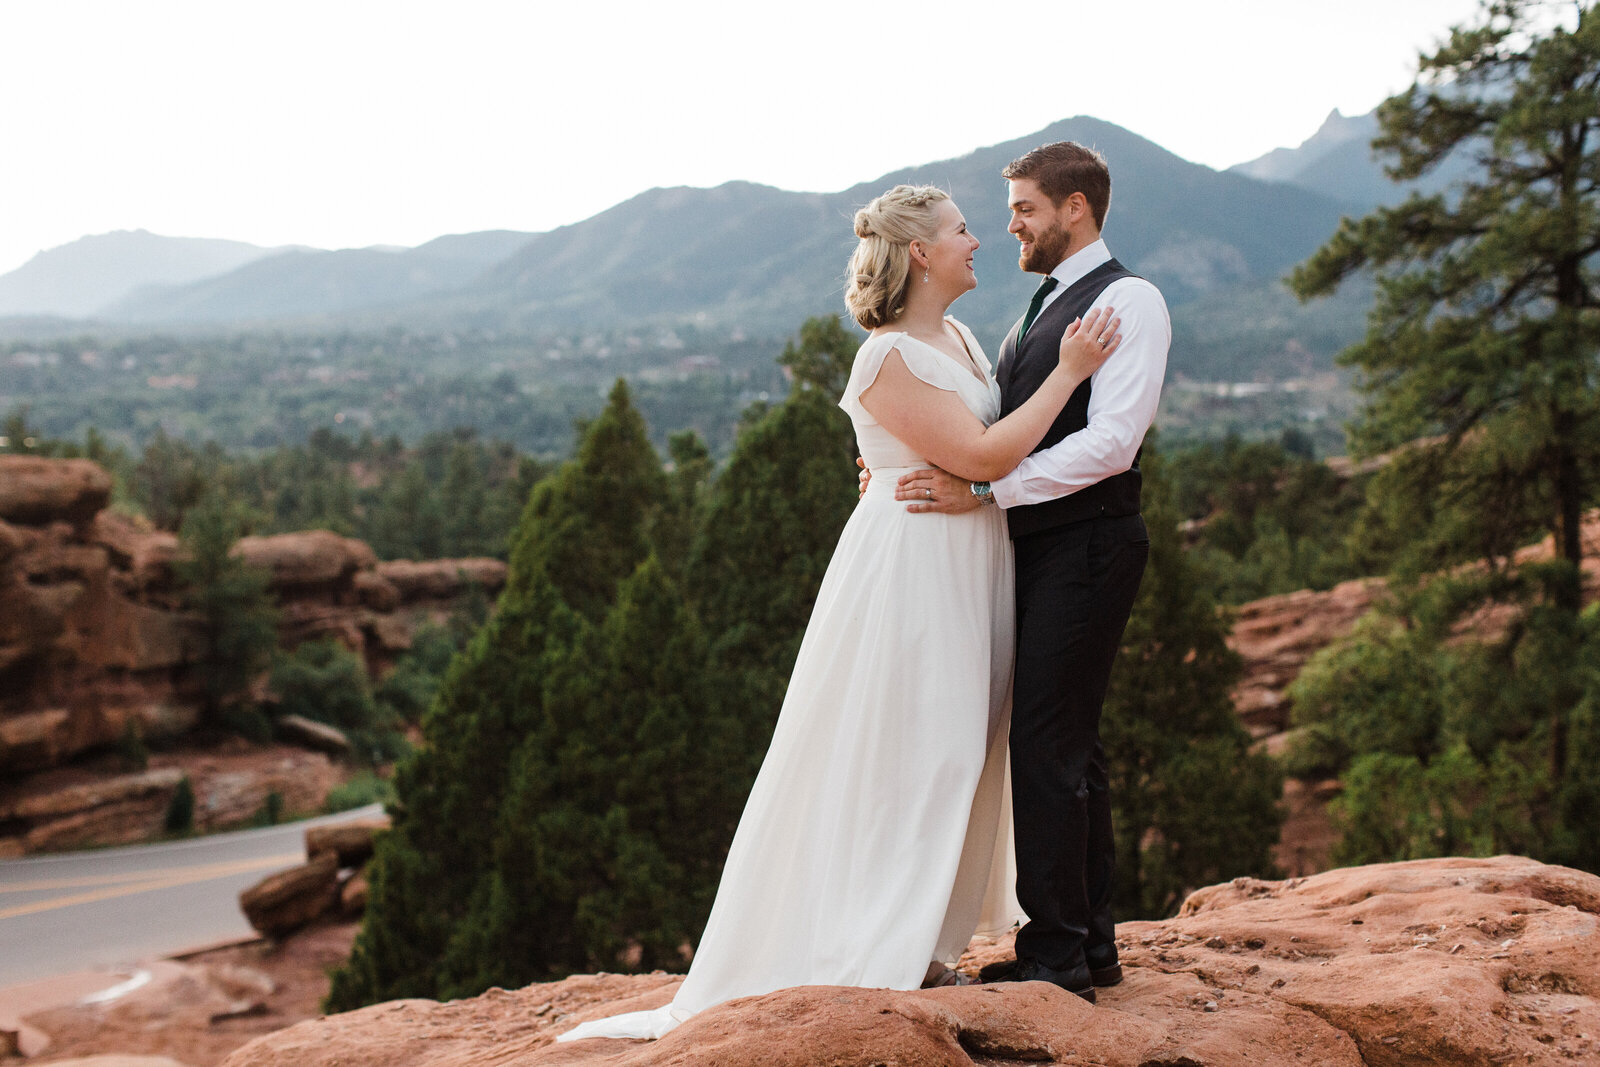 Portrait of a bride and groom posing on top of a rock formation after their wedding ceremony at the Garden of the Gods in Colorado Springs, Colorado.  The bride on the left is wearing a short sleeve, long, elegant, white dress while the man on the right is wearing a three piece suit with a tie but without the jacket. The Rocky Mountains and many trees can be seen spanning out behind them.